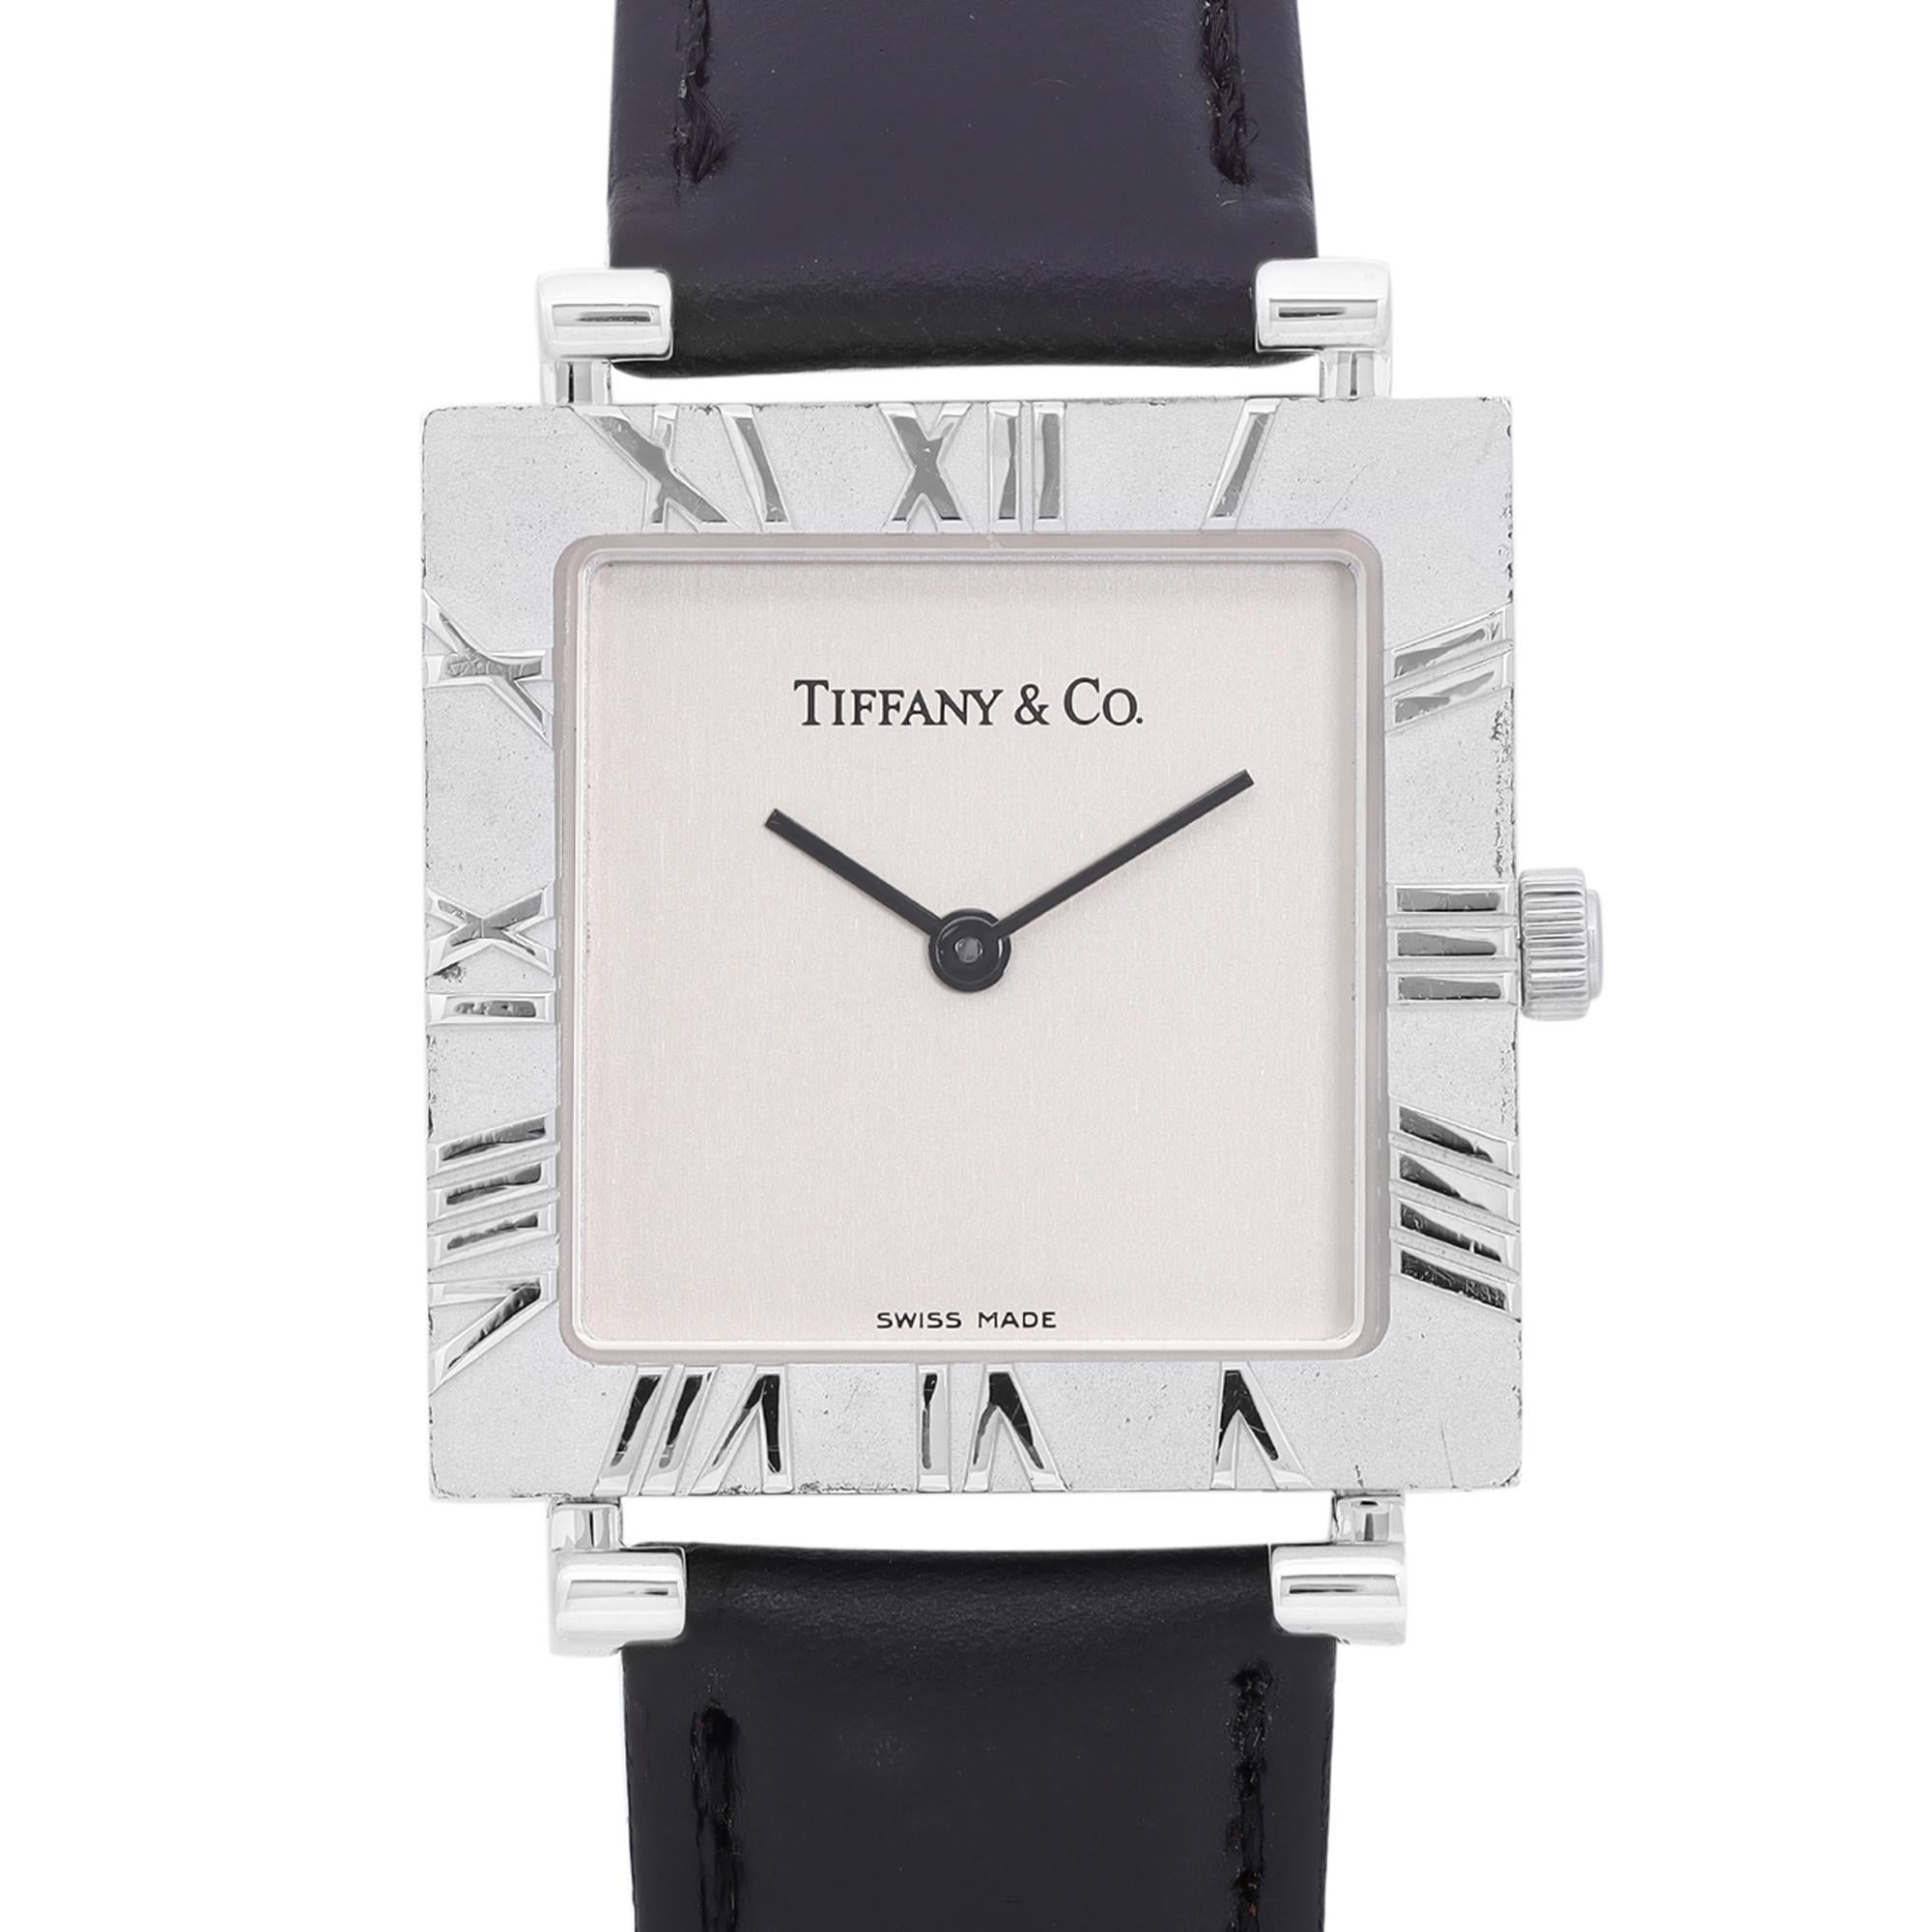 Aftermarket strap with original buckle.

Pre-Owned Tiffany & Co. Atlas 33mm Sterling Silver Leather Gray Dial Quartz Men's Watch. This Beautiful Timepiece Features: Sterling Silver Case with a Black Leather Strap, Fixed Dial with Ramen Numeral Hour